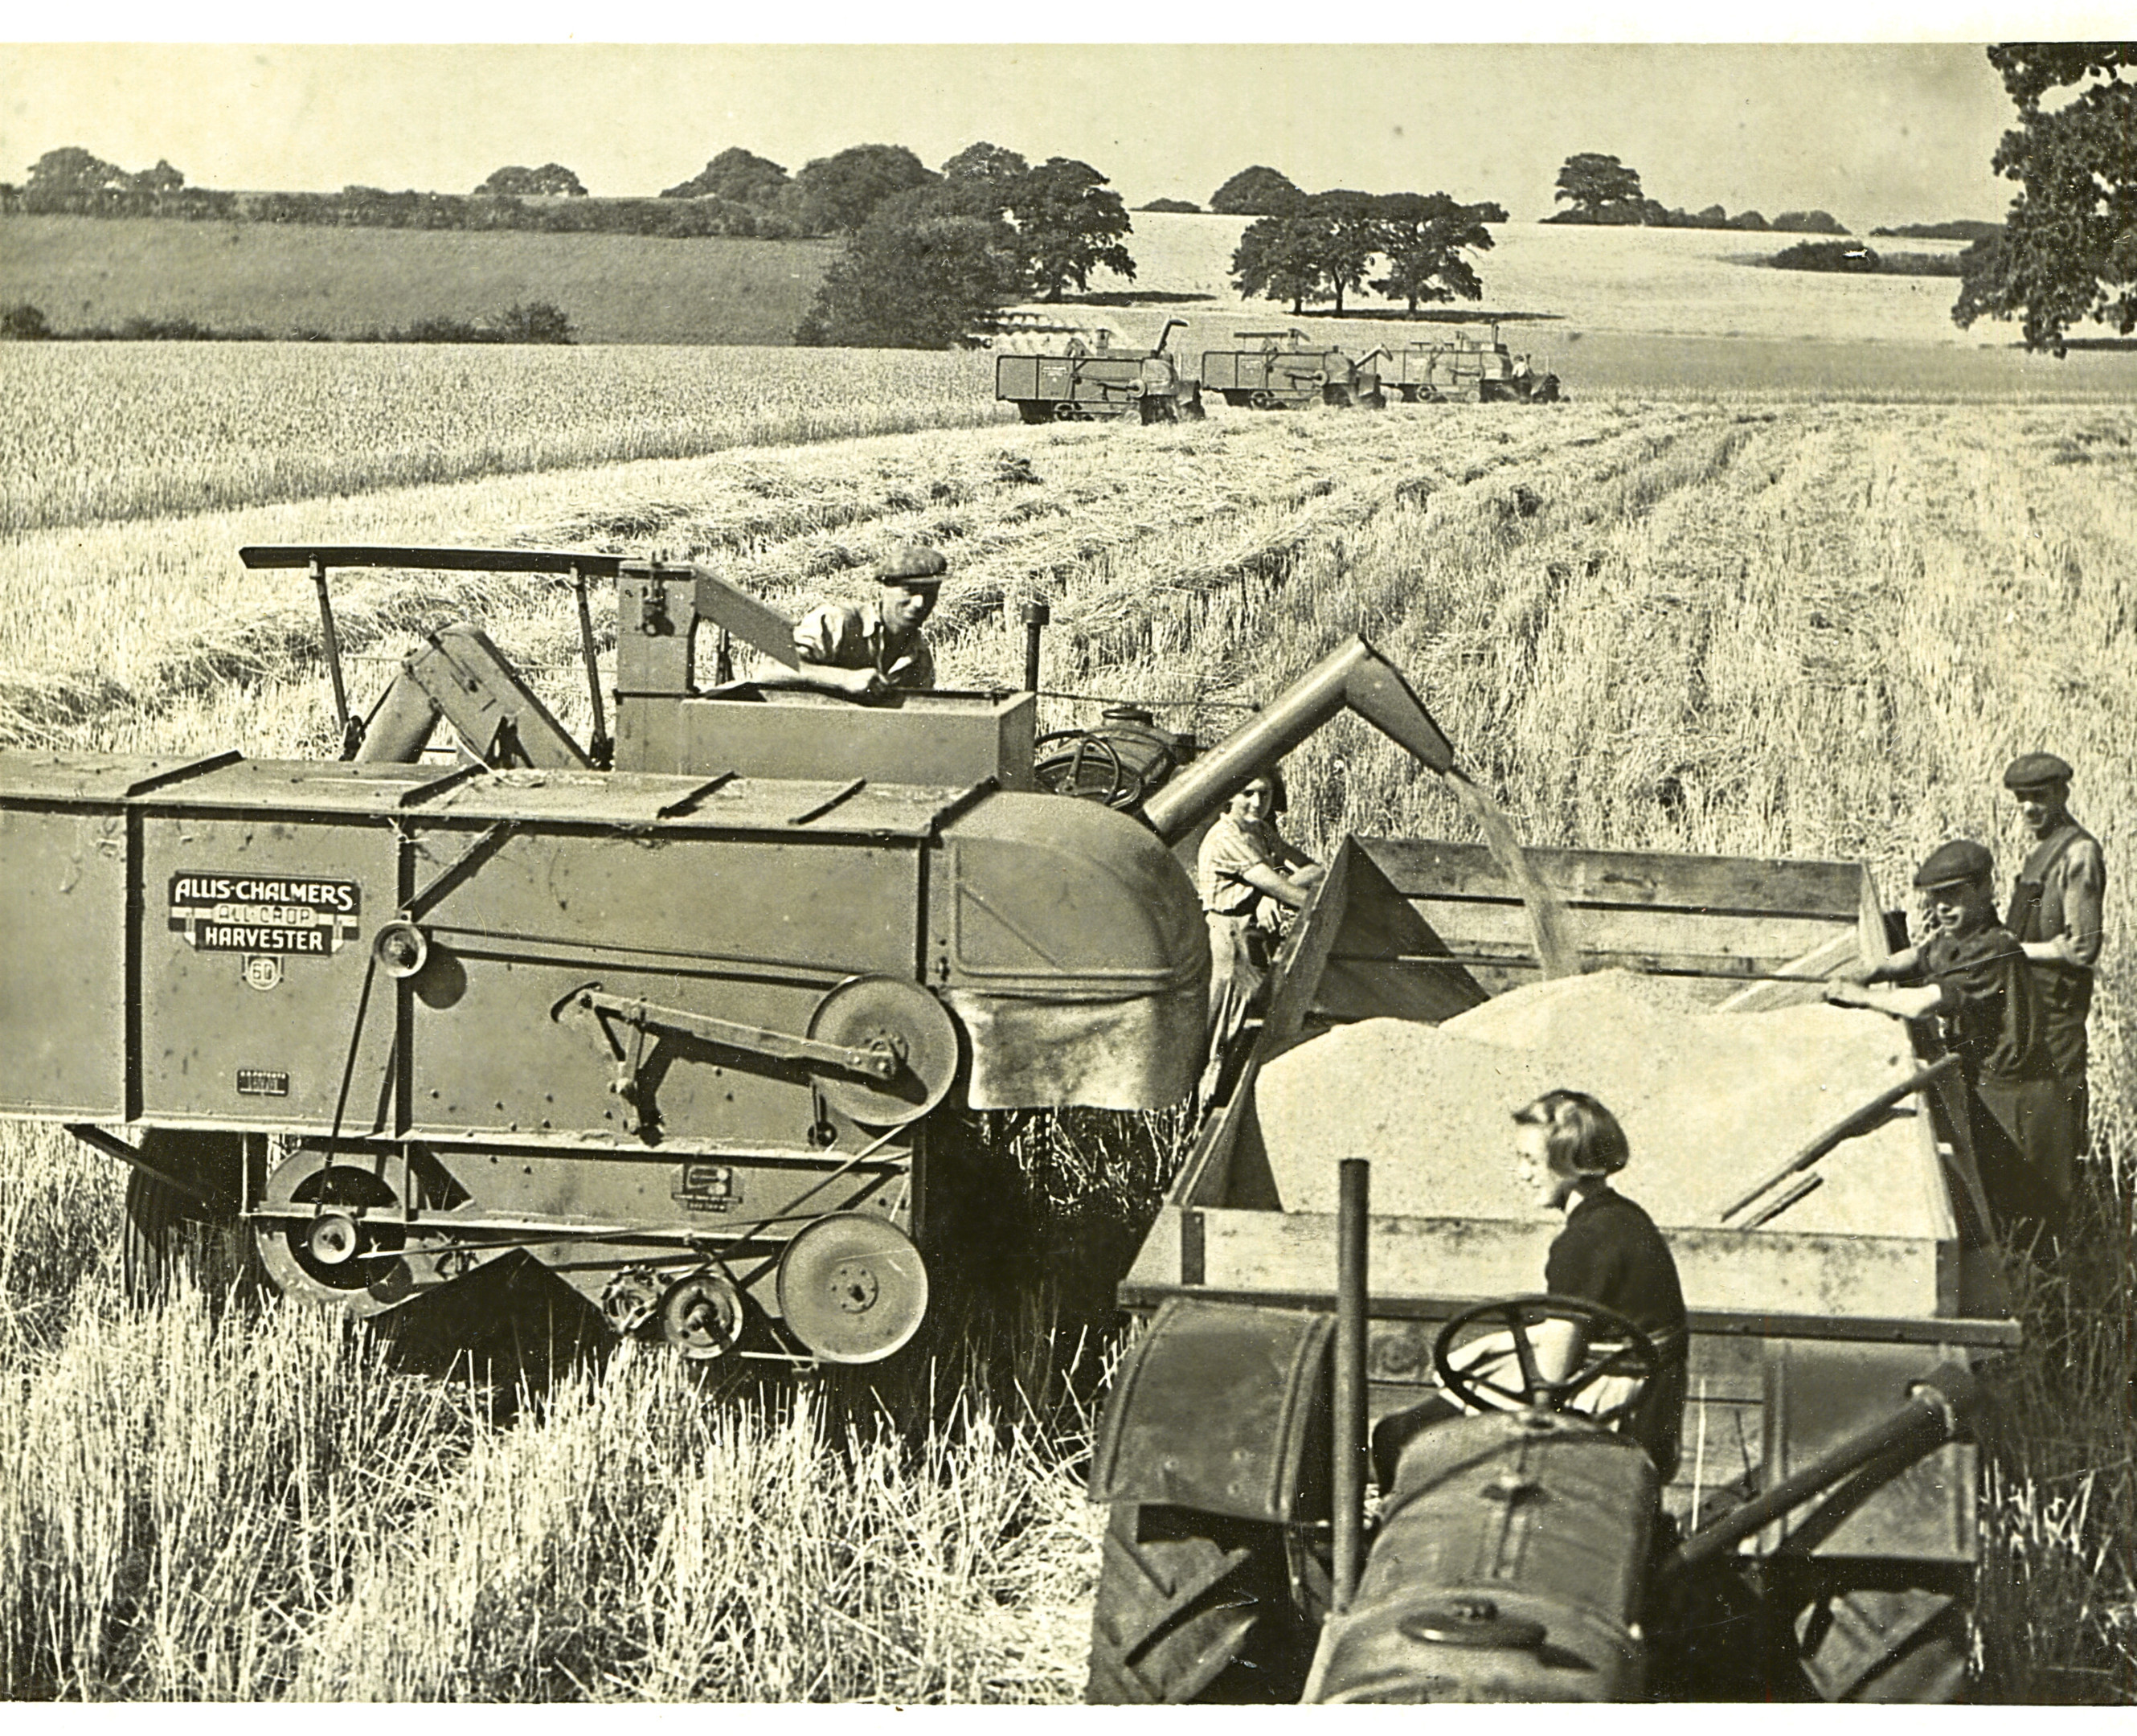 One of the combines in action.